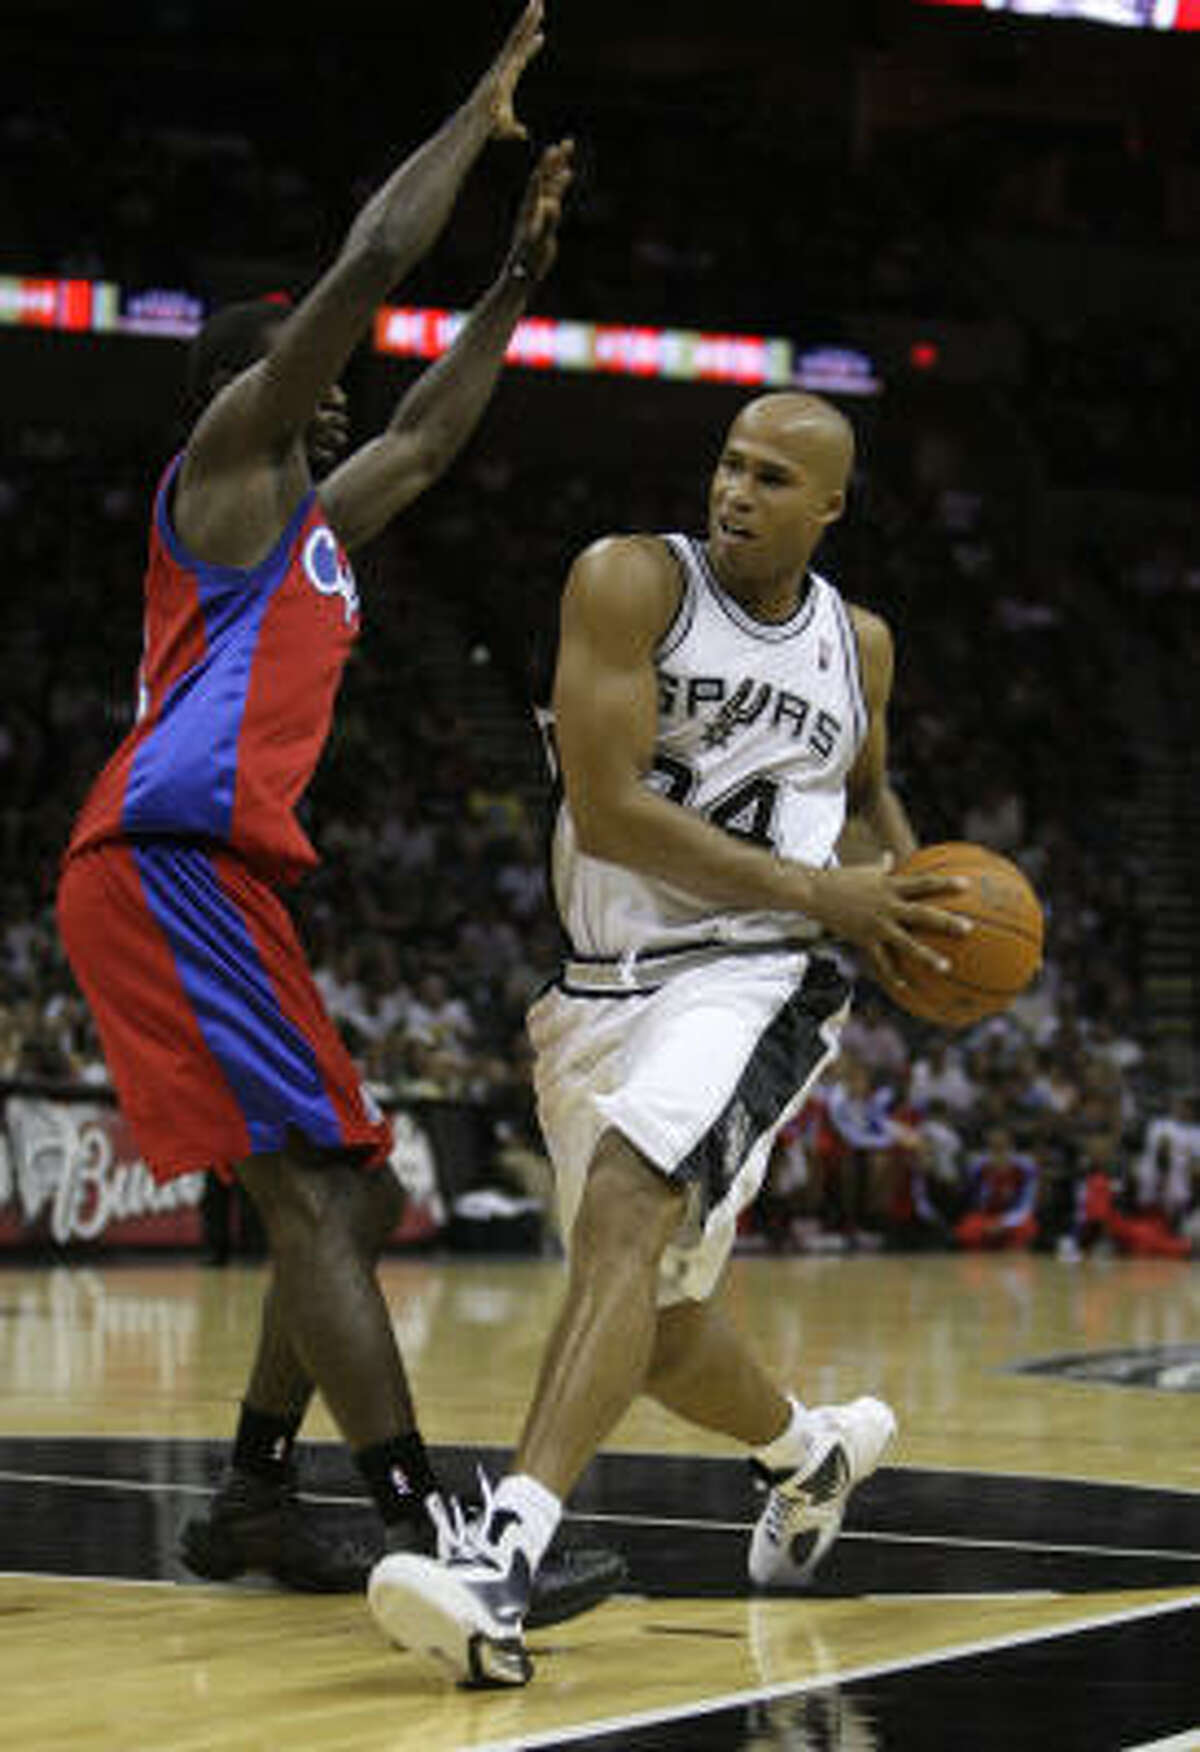 San Antonio Spurs Tim Duncan labored with nagging injuries most of the season and Manu Ginobili appeared in just 44 games. Still, San Antonio managed to win the Southwest Division. The arrival of Richard Jefferson, above, an All-Star-caliber talent on the wing, will take pressure off the Big Three. Predicted finish: 56-26 (first in Southwest, third in West).